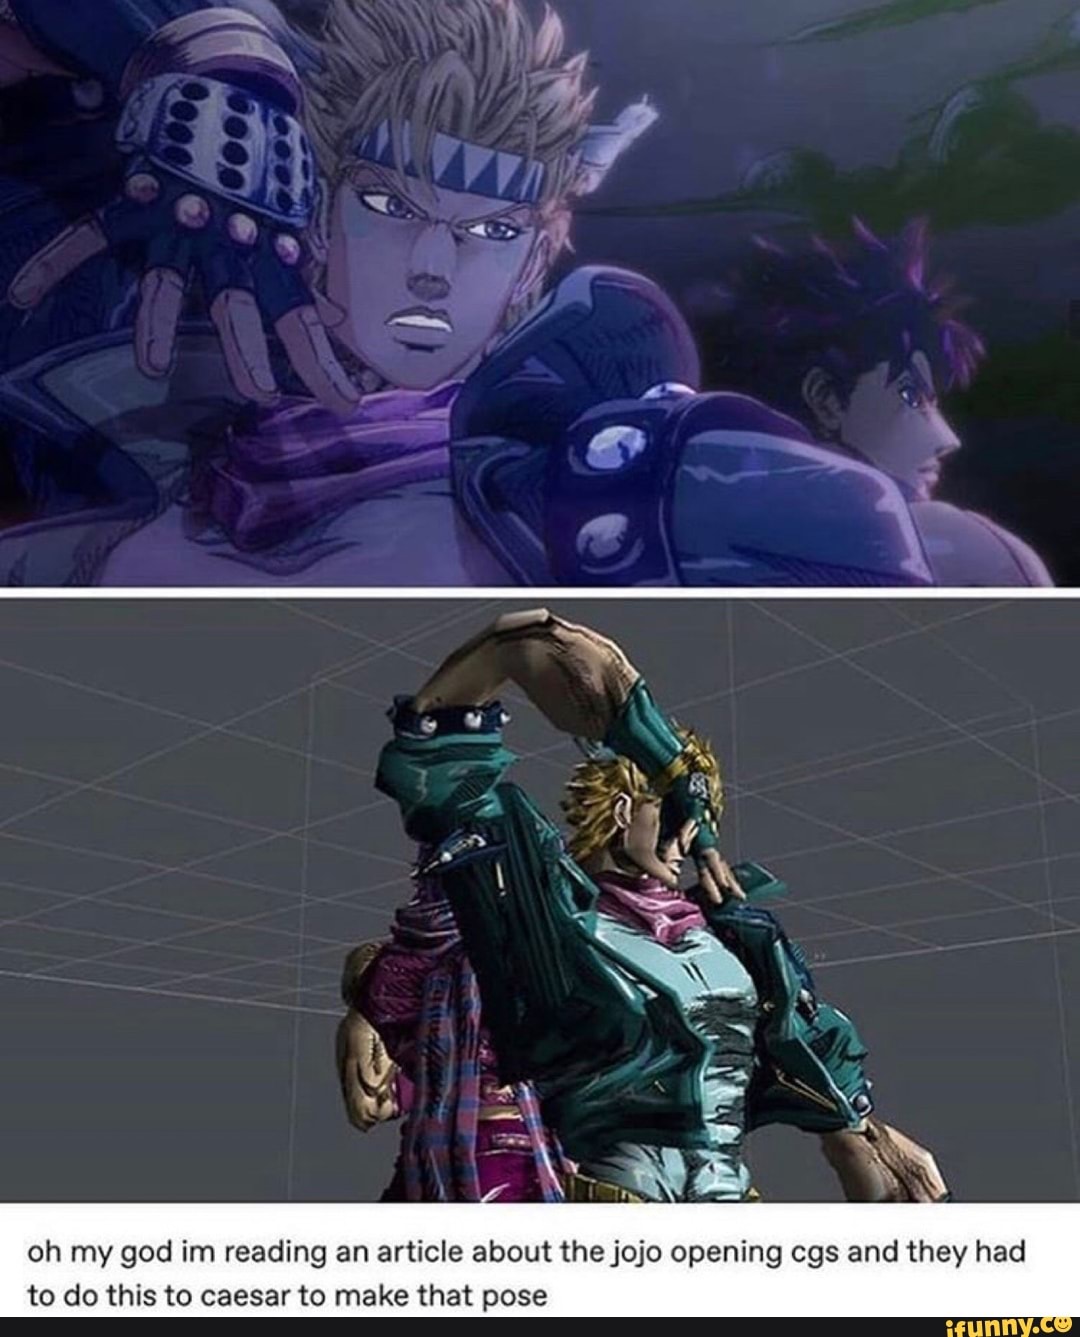 JoJo poses are so cool - iFunny